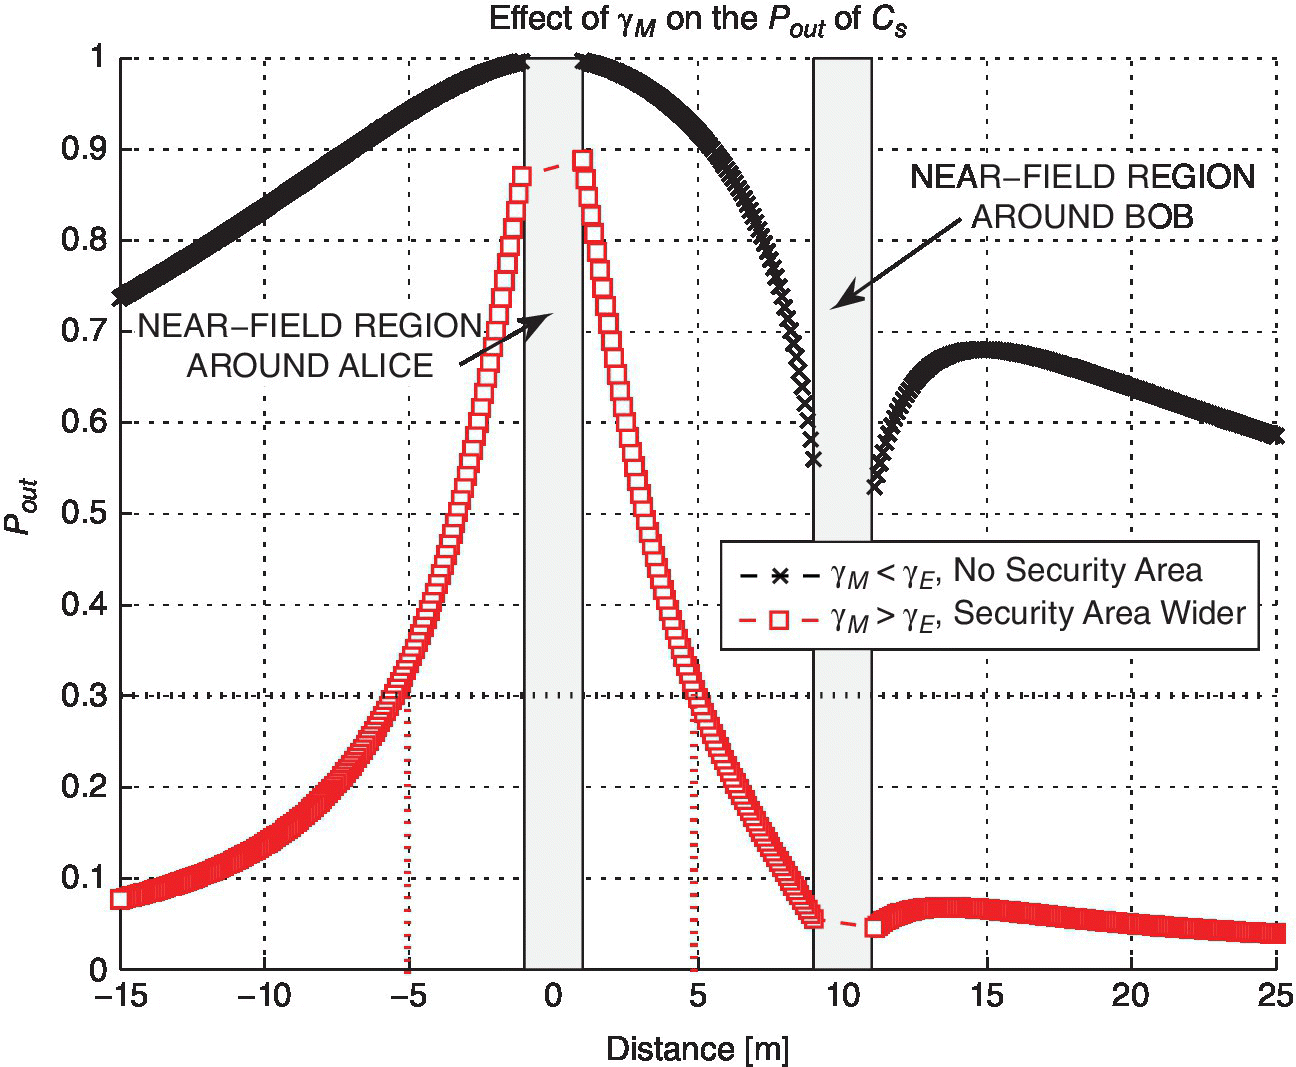 Graph of the effect of γM on the Pout of Cs displaying 2 curves for γM < γE, no security area and γM > γE, security area wider, passing through vertical bars (near-field region around Alice and around Bob).